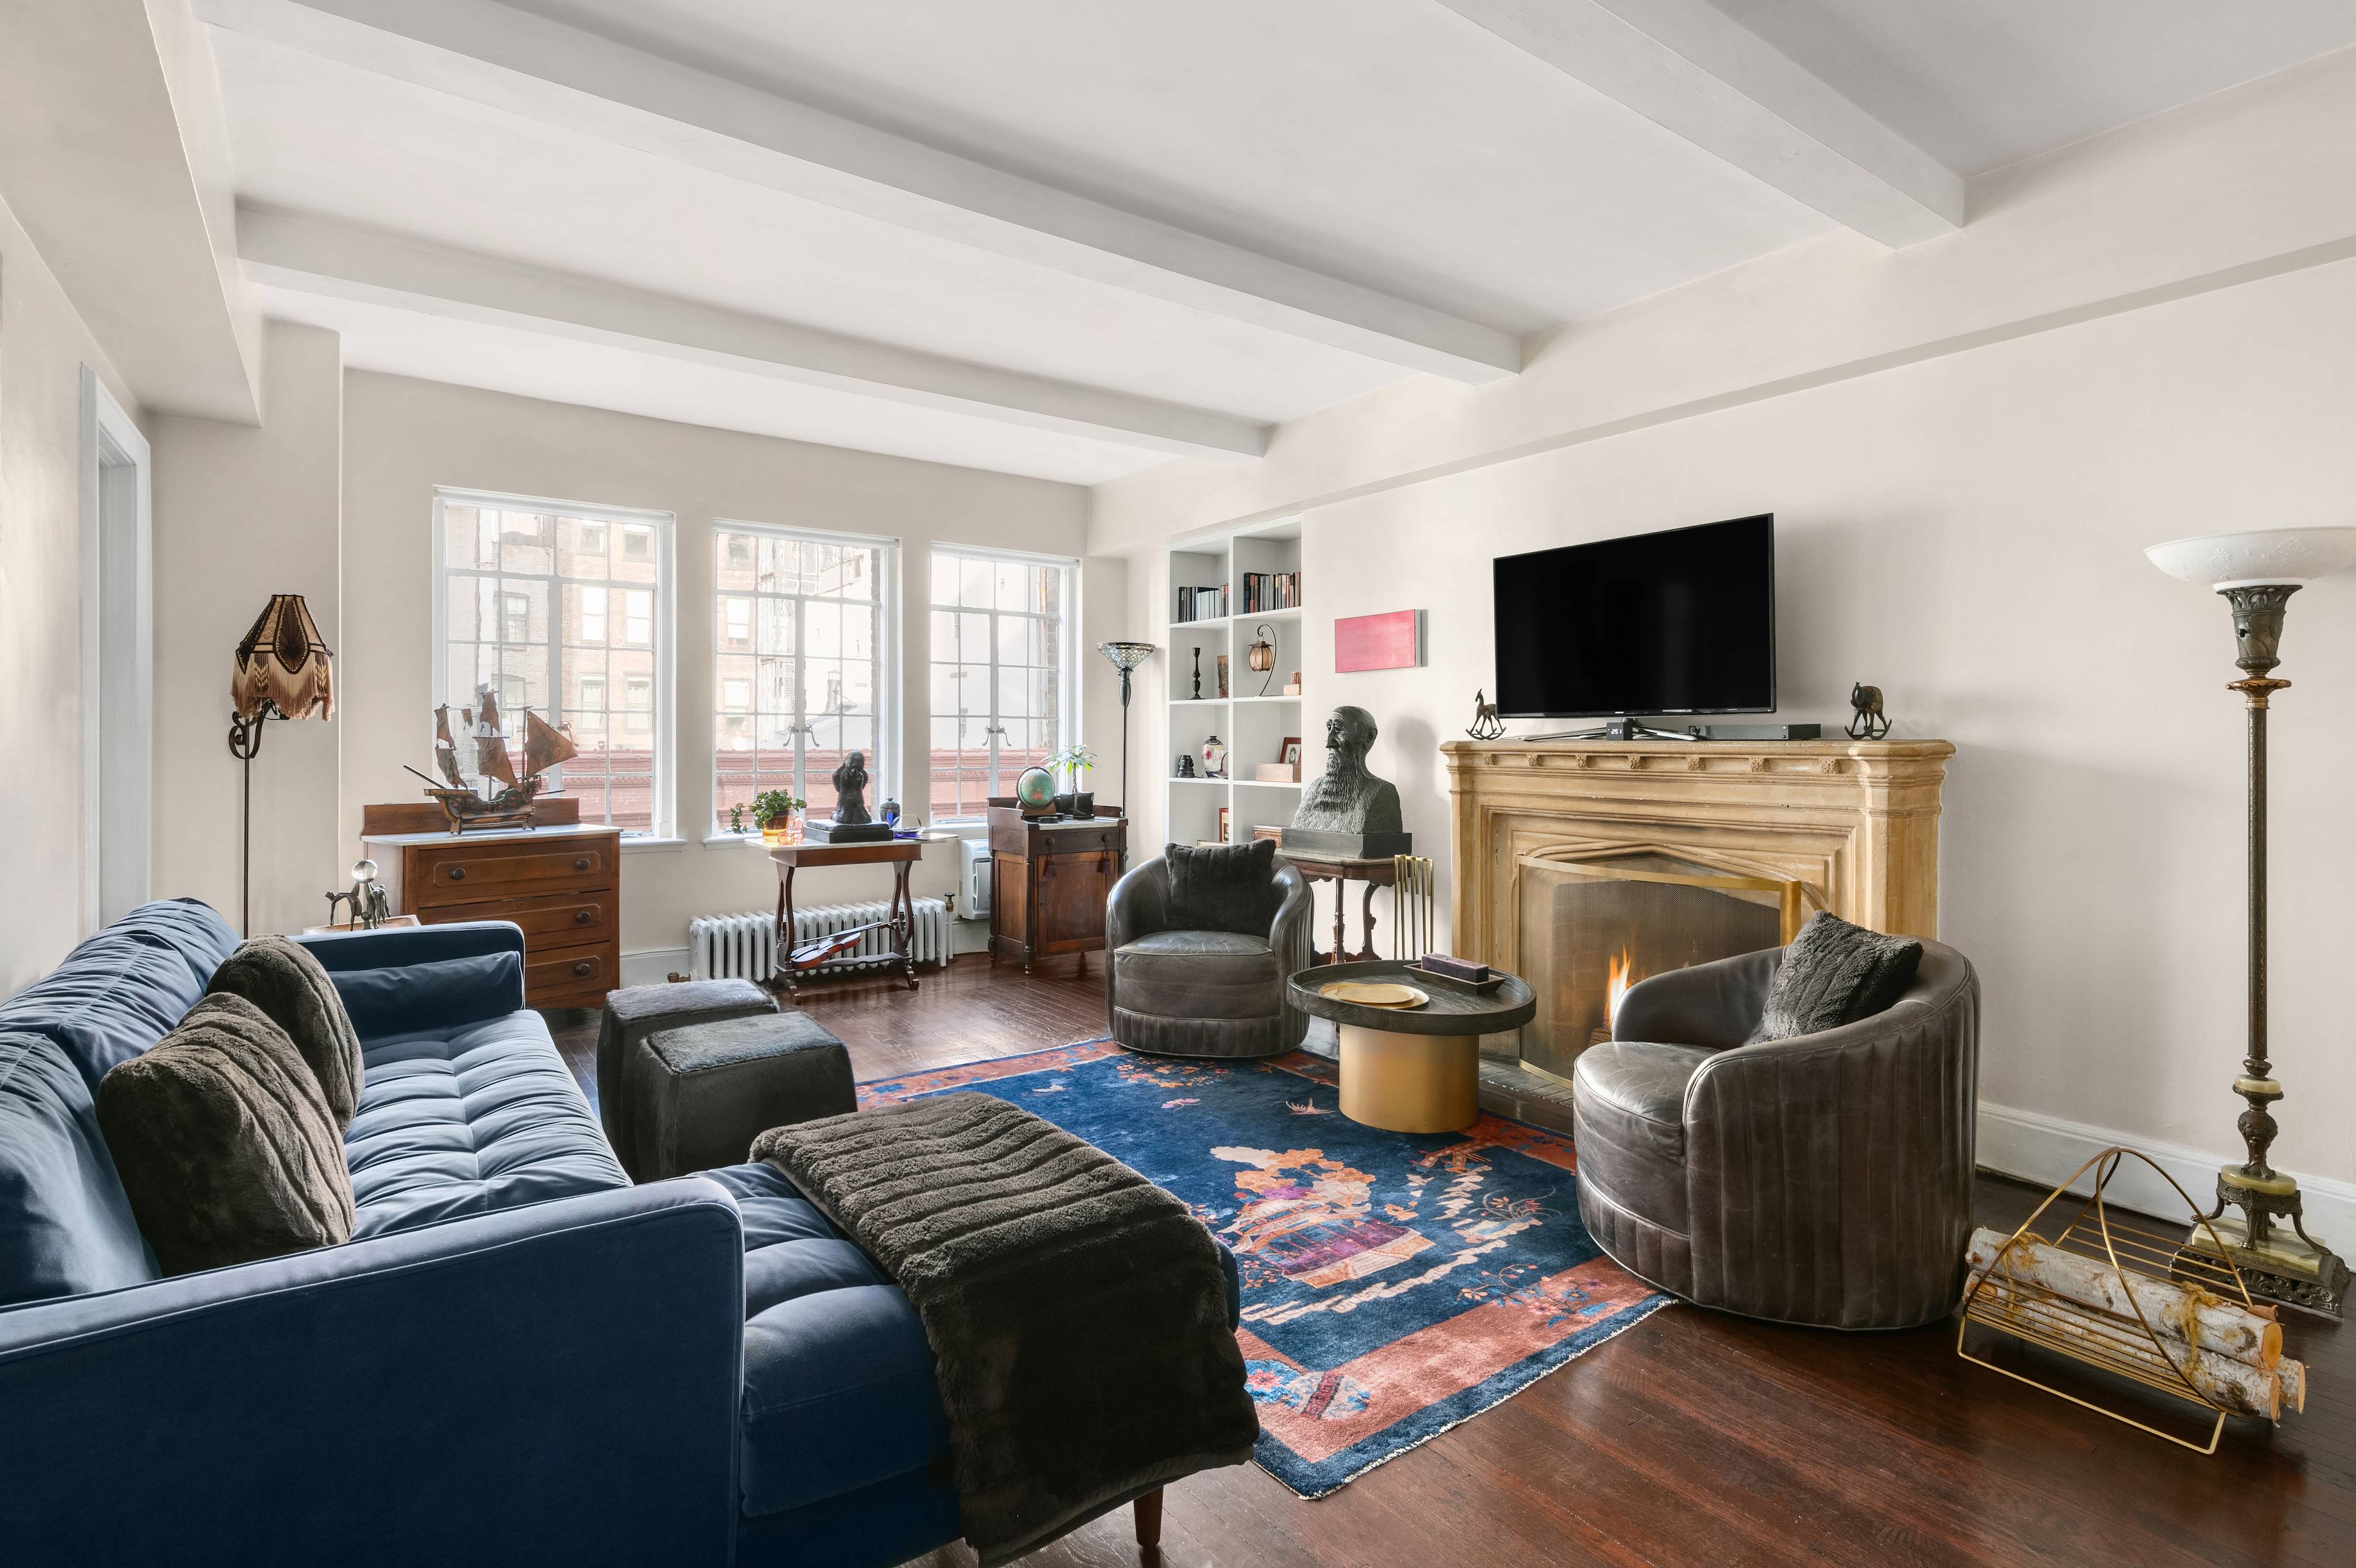 Apartment 7J is a beautifully maintained move in ready one bedroom in one of the most desirable prewar co op buildings in prime Greenwich Village.